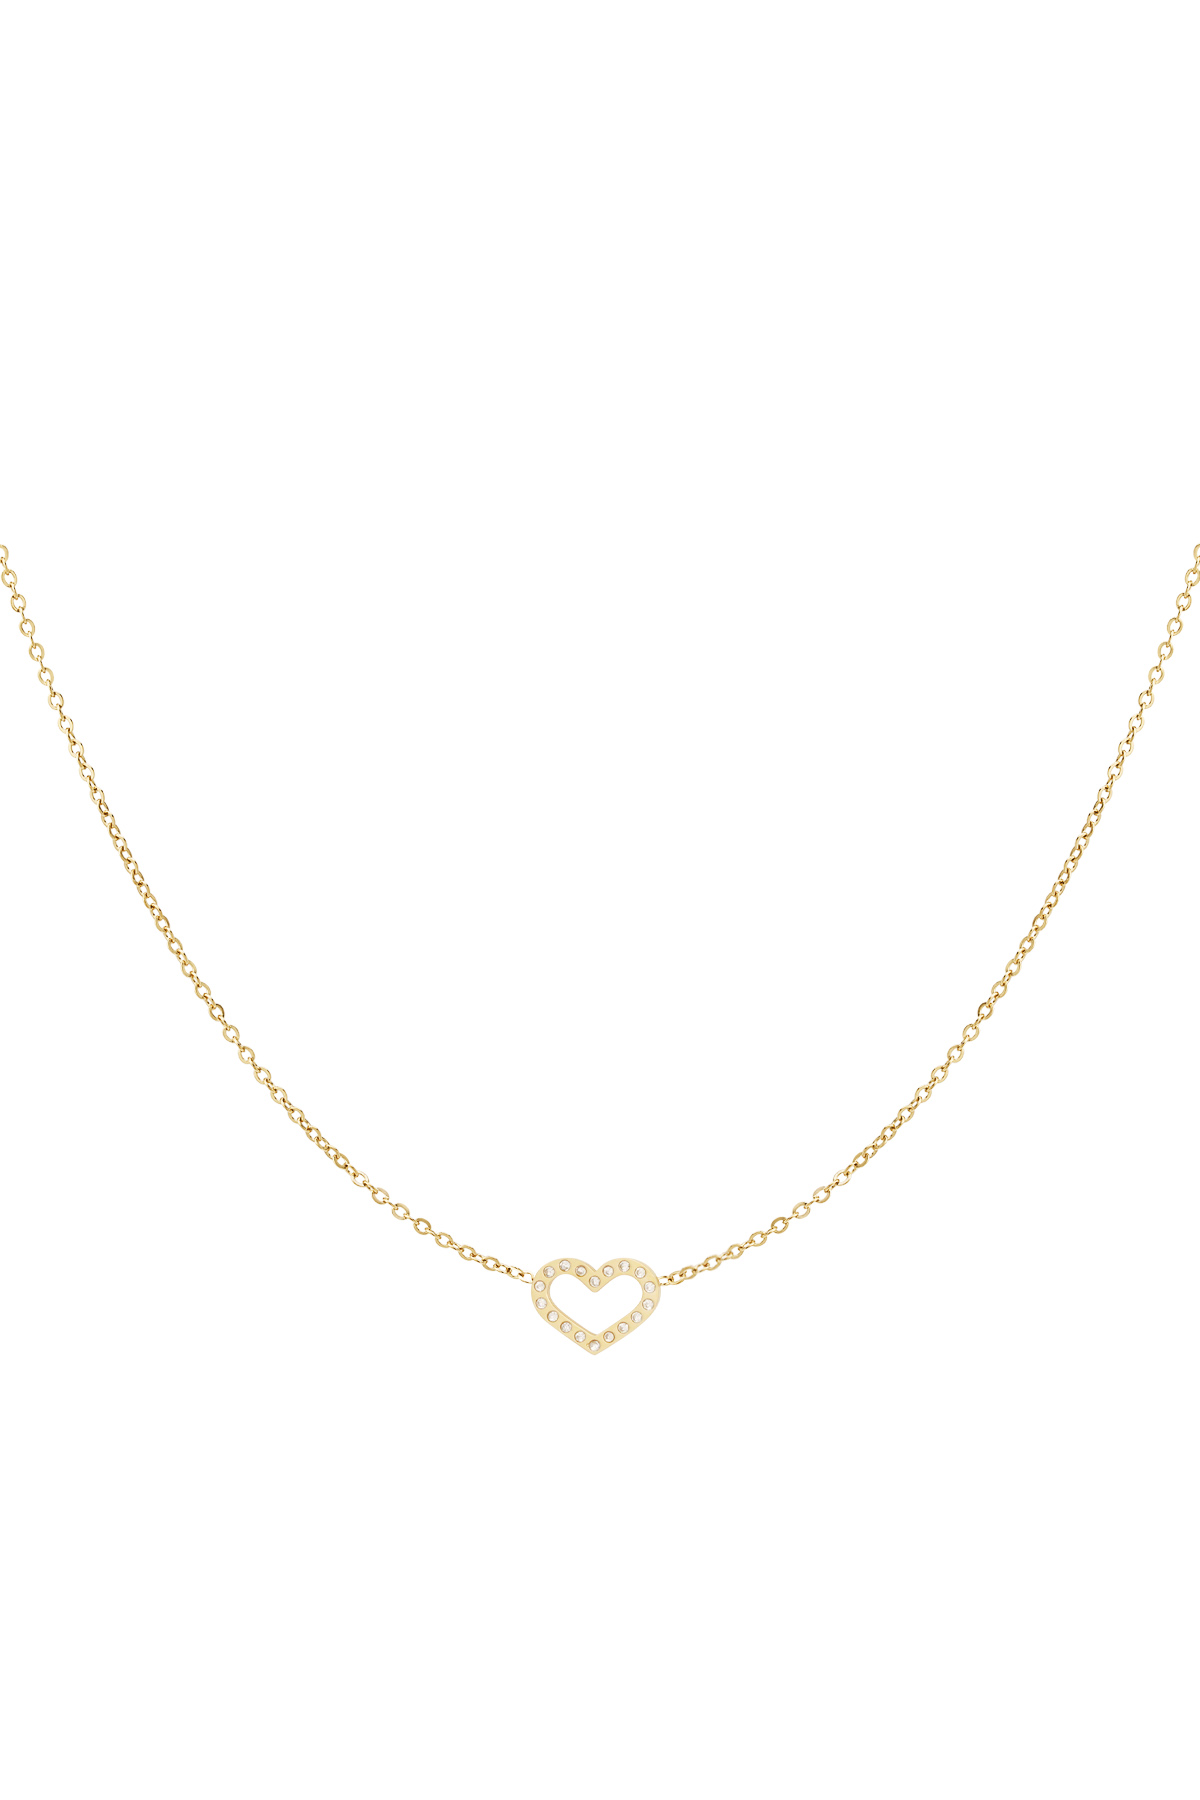 Necklace forever bond - gold Picture4